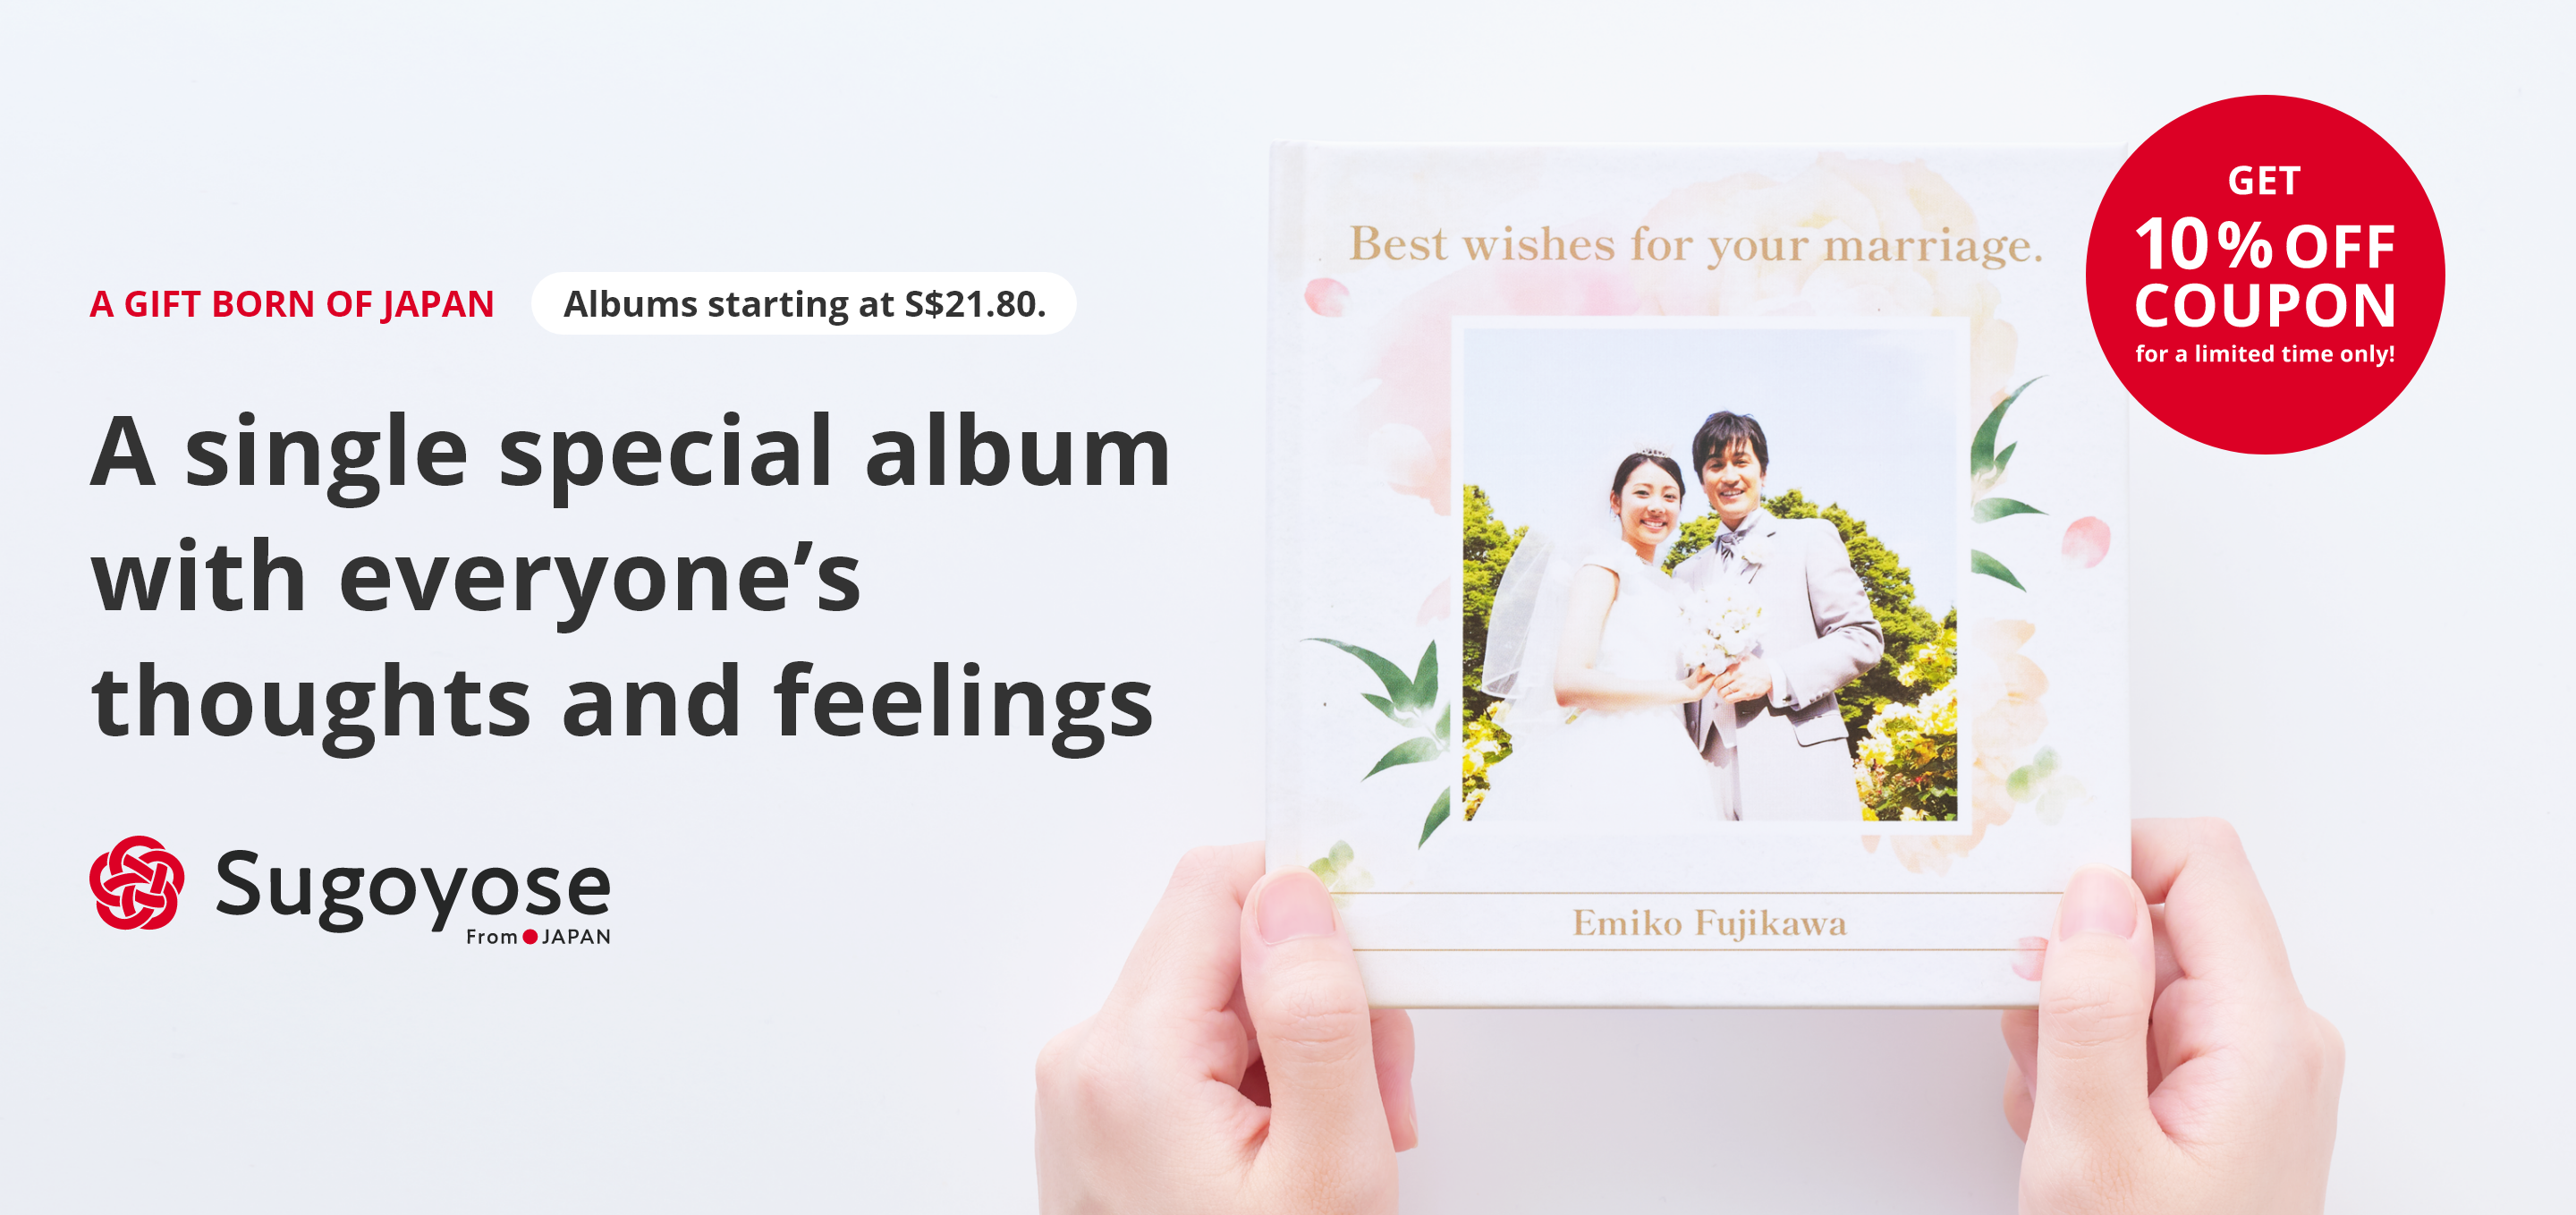 A single special album with everyone’s thoughts and feelings